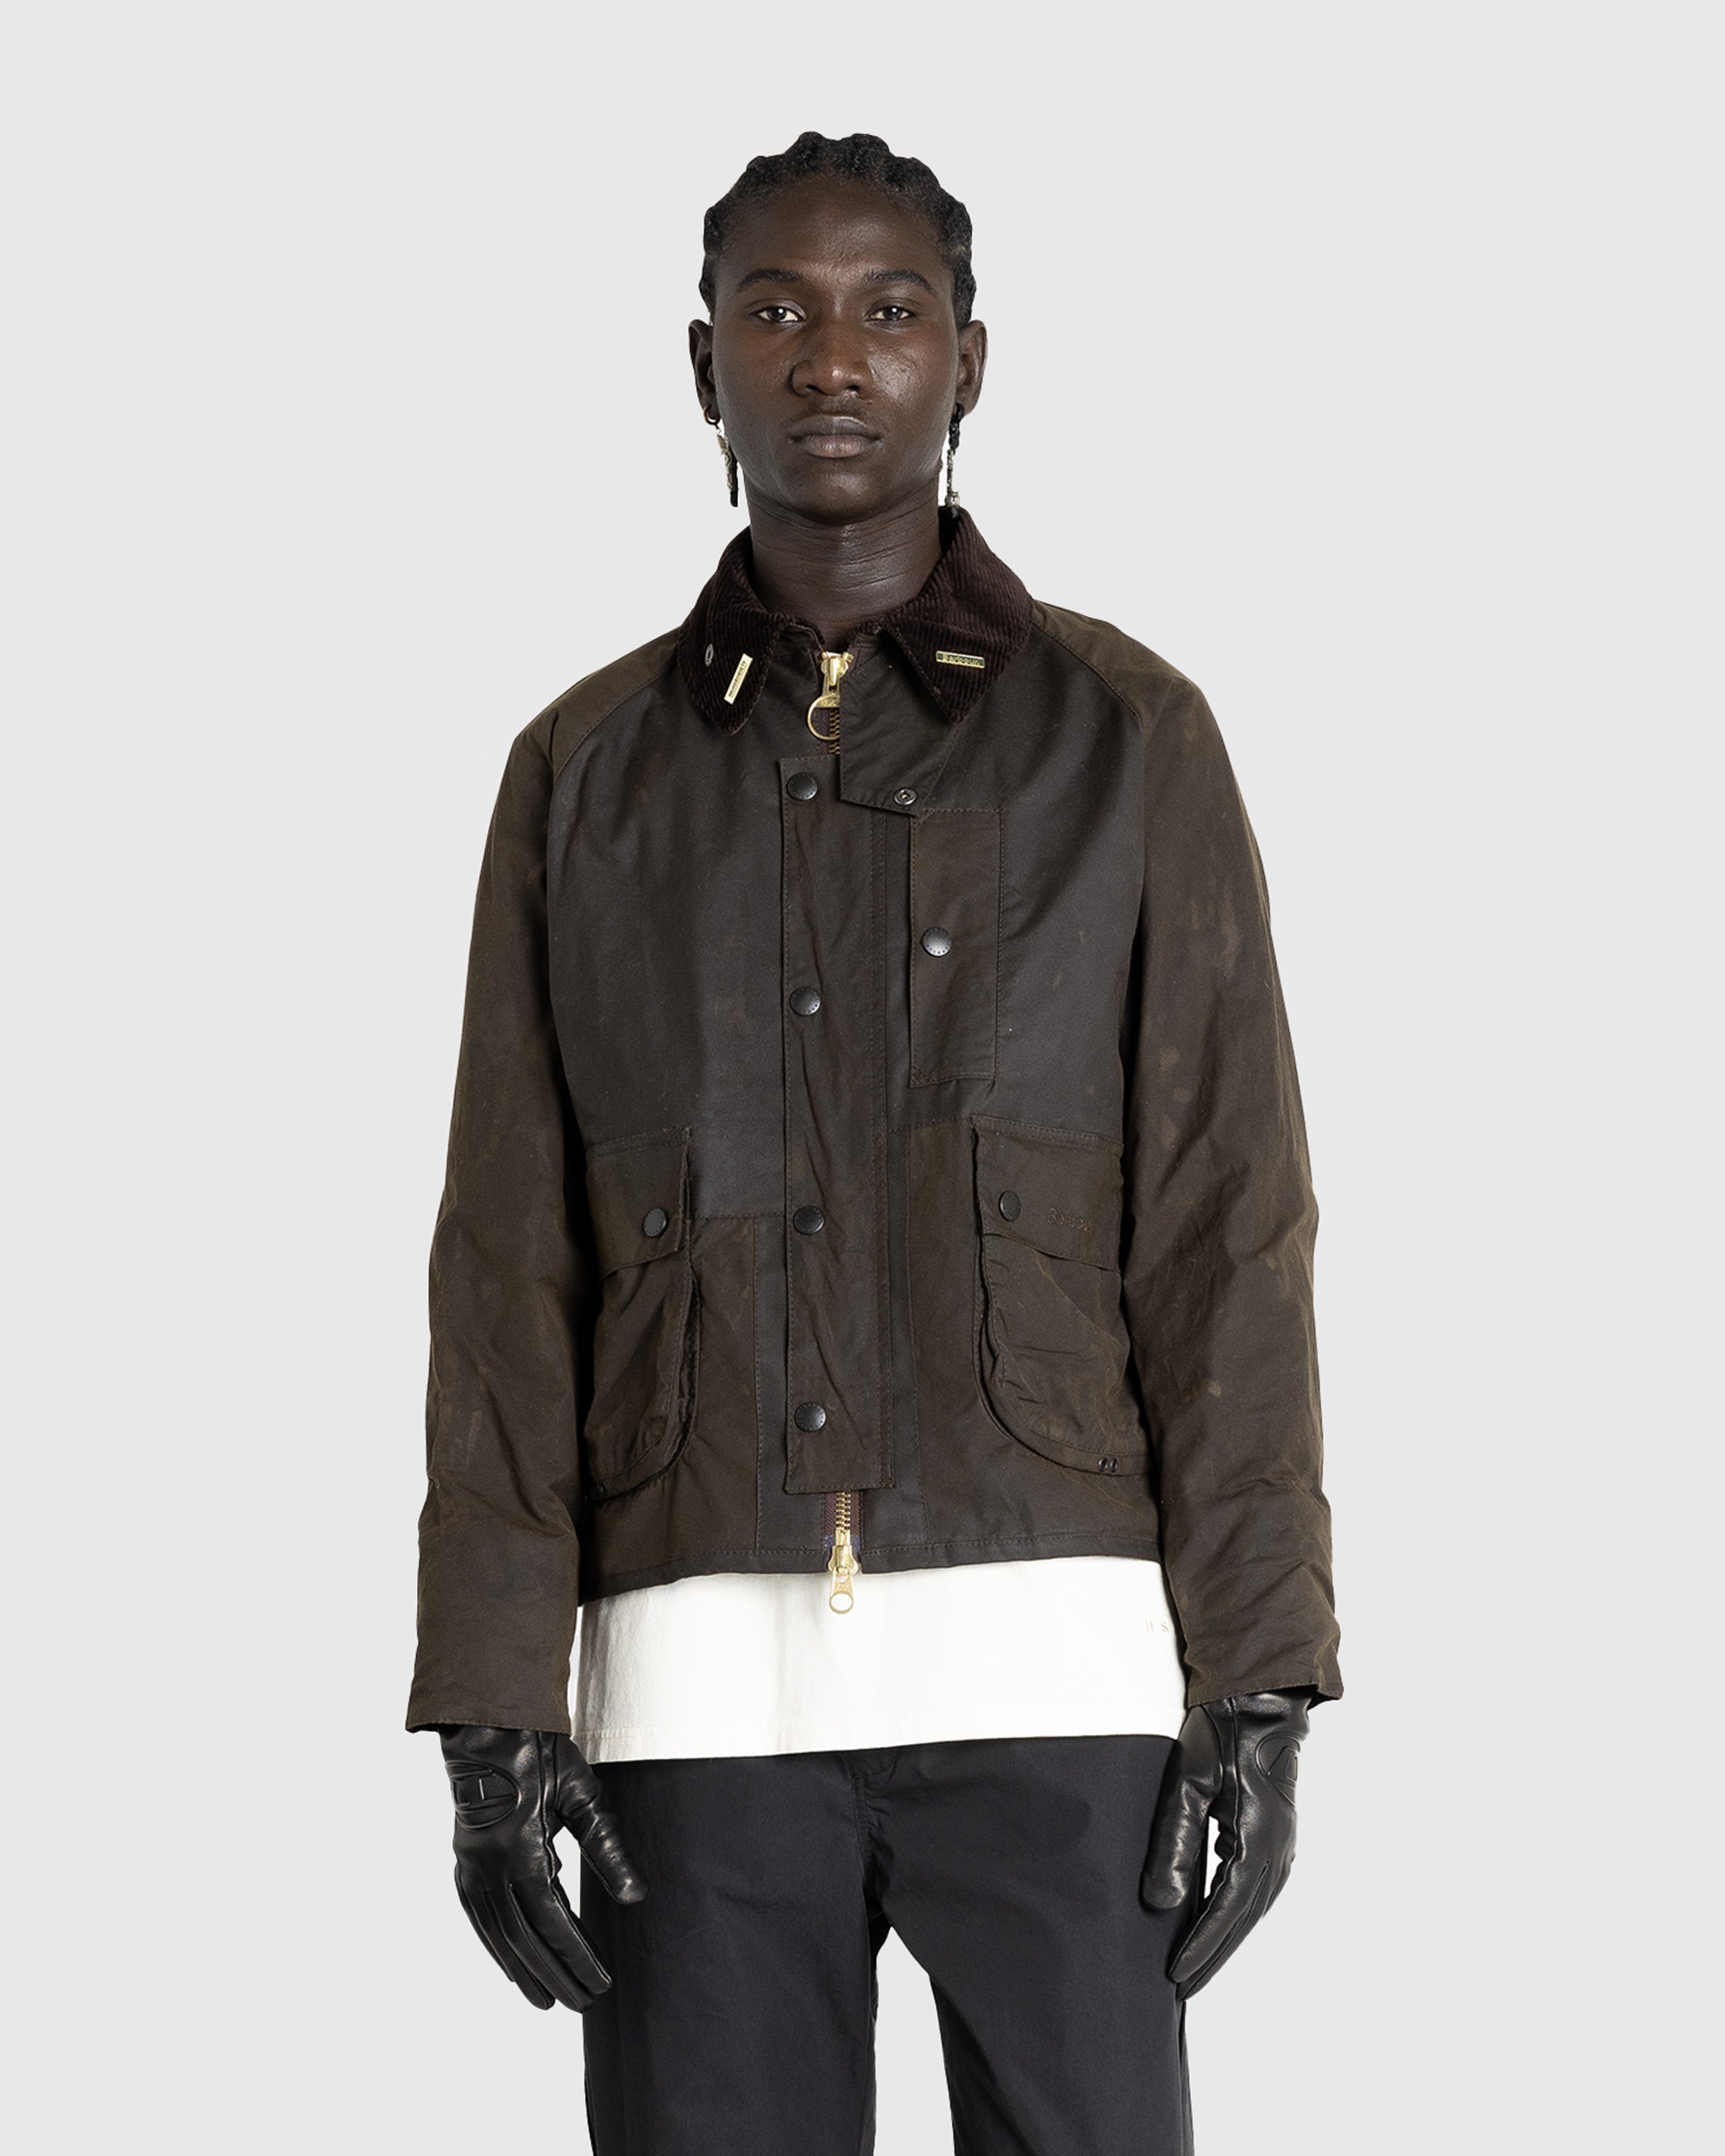 Barbour x Highsnobiety - Re-Loved Cropped Bedale Jacket 1 - 36 - Grey-Black - Clothing -  - Image 6